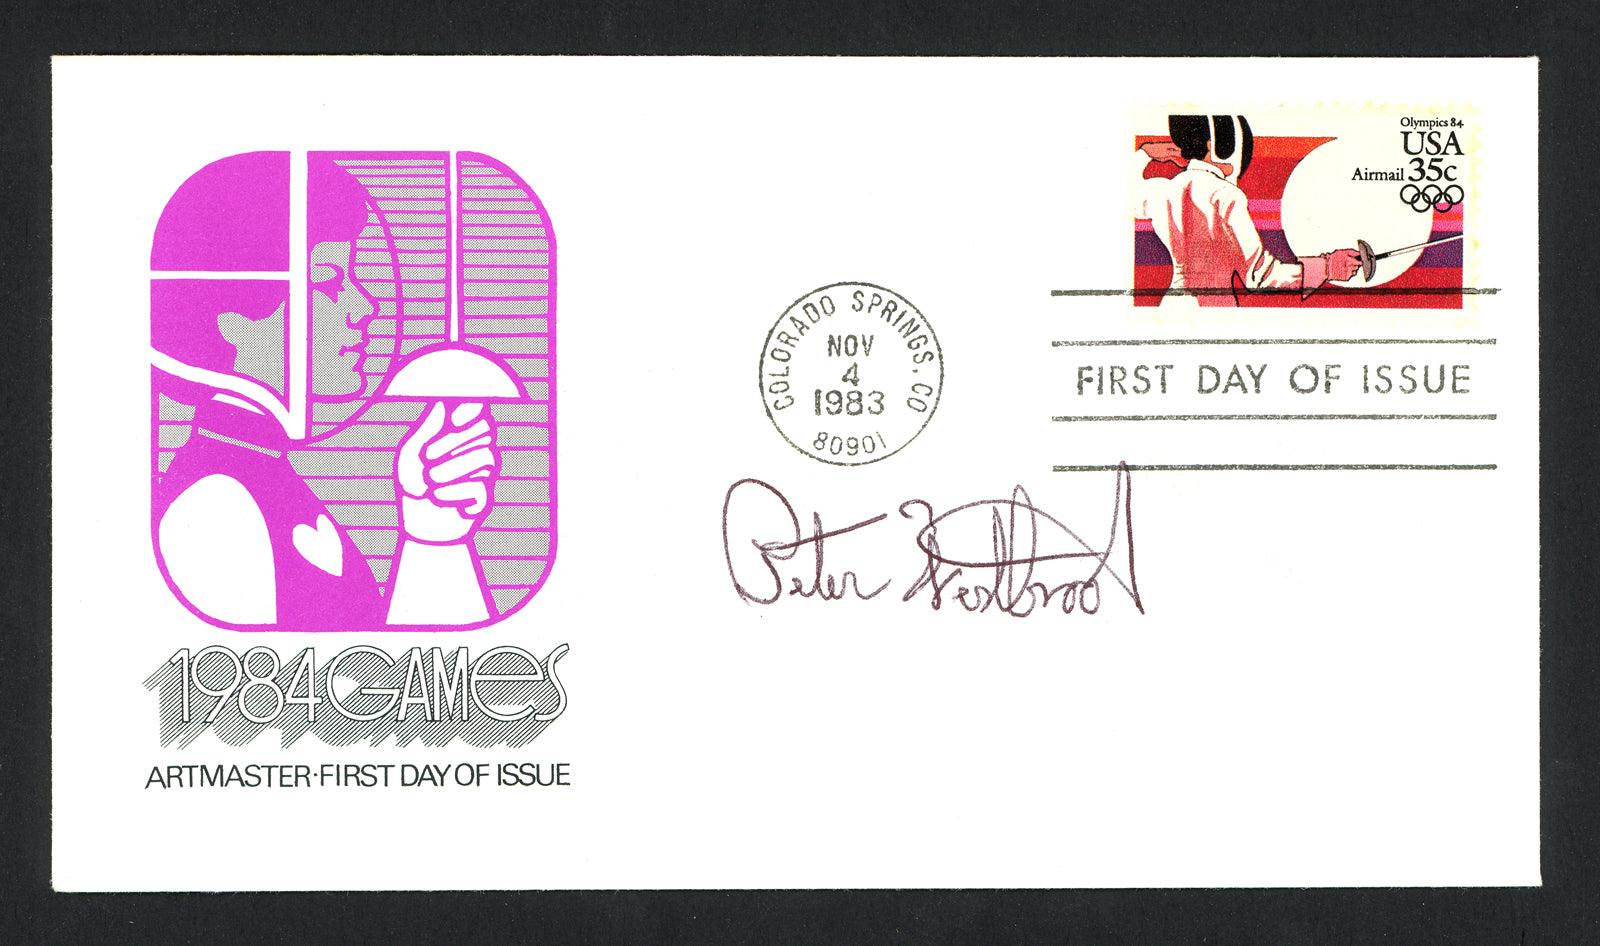 Peter Westbrook Autographed First Day Cover 1984 Olympic Fencer SKU #159574 - RSA